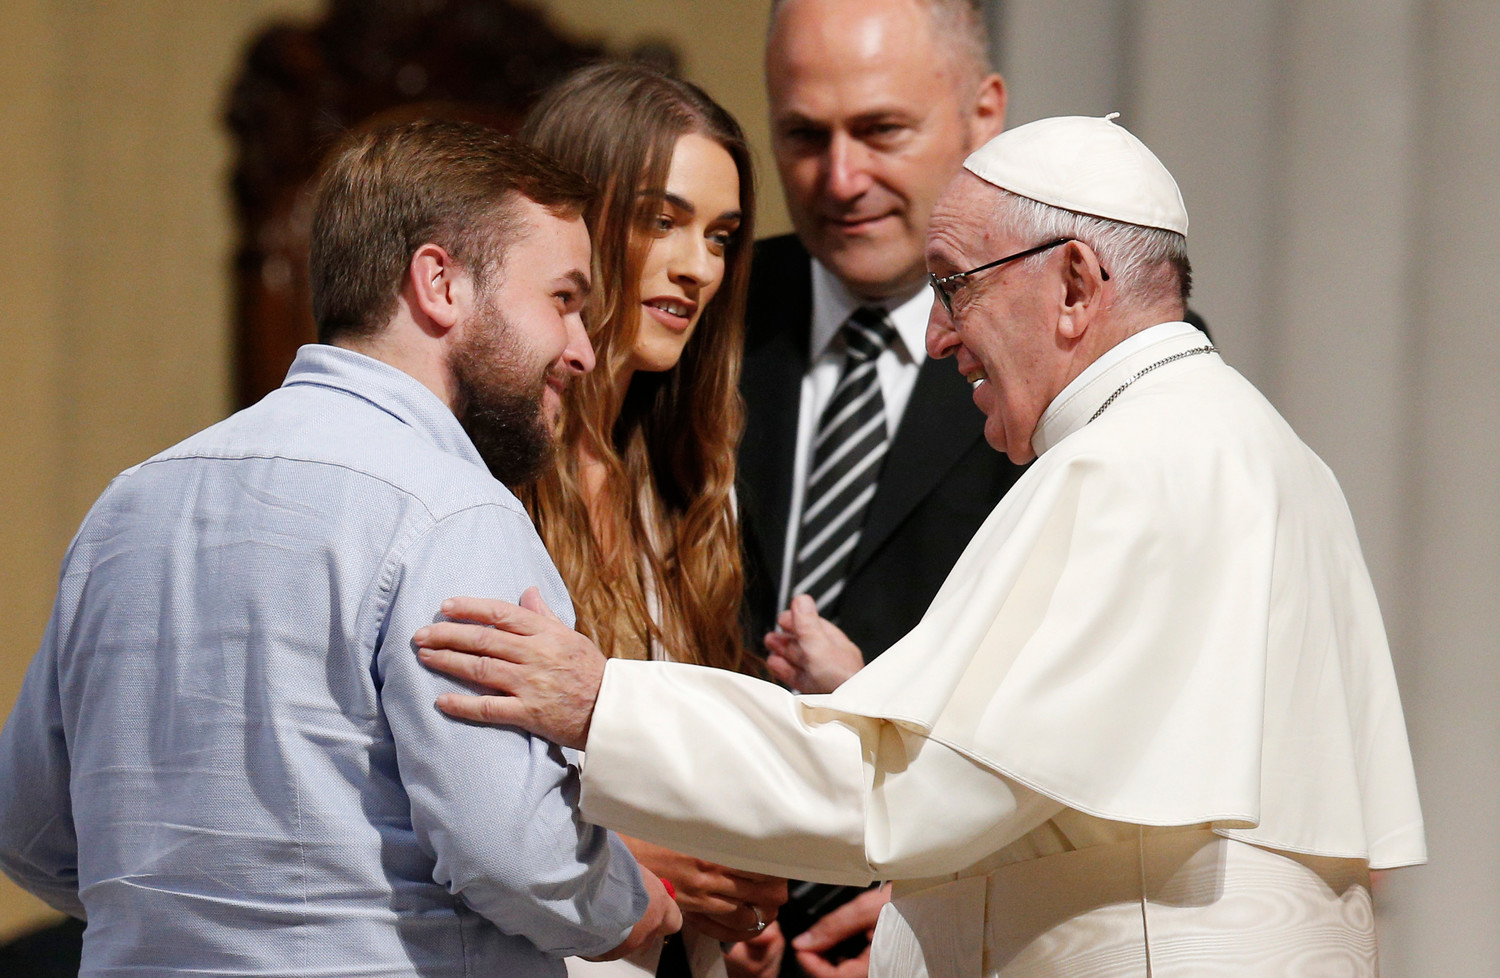 nål mirakel Let at forstå Faith strengthens marriage, makes love grow, Pope says while visiting  Ireland | The Catholic Missourian